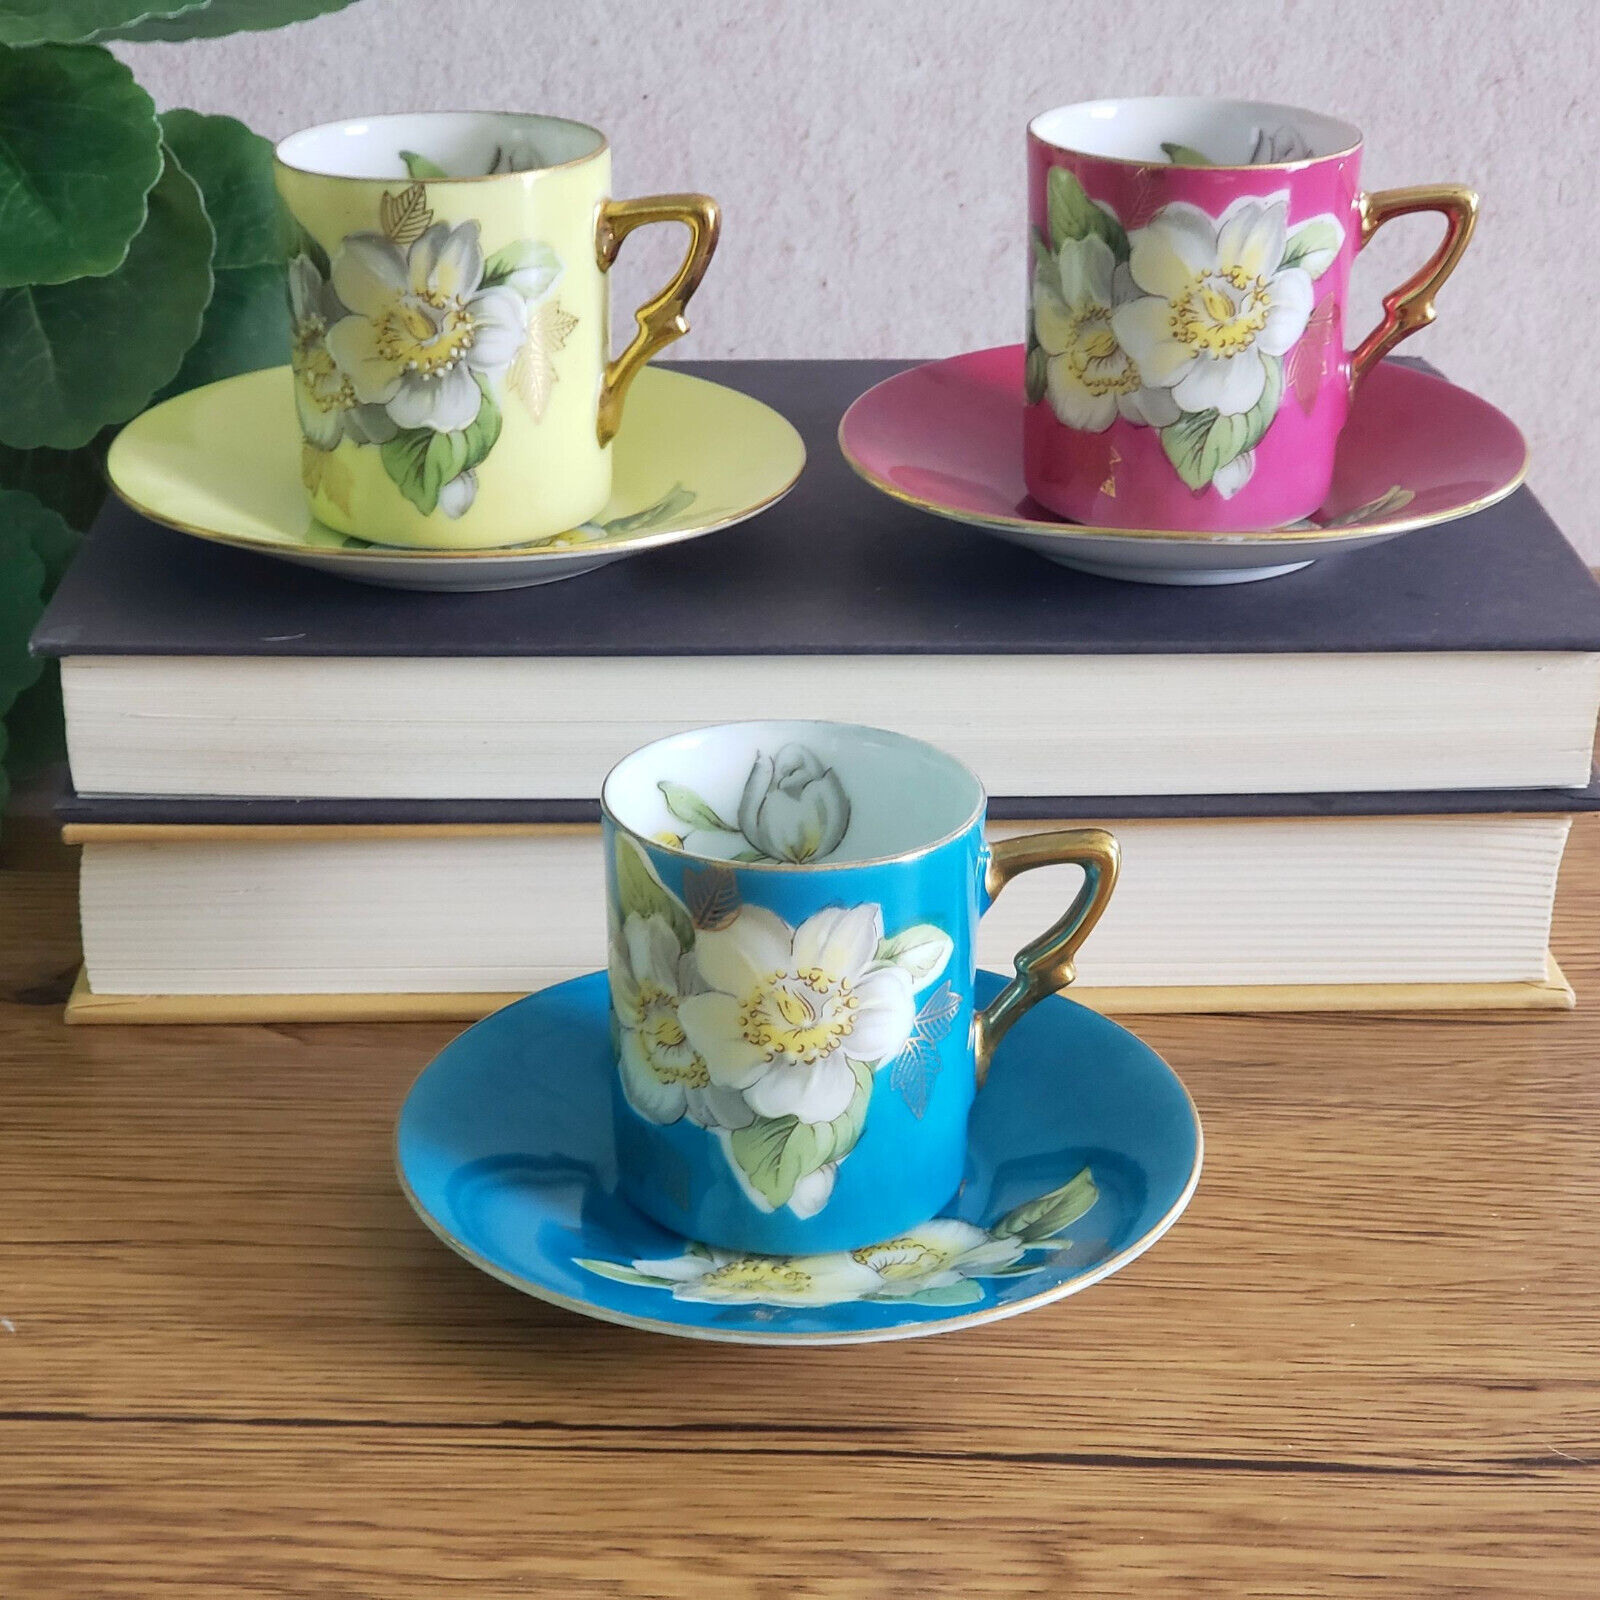 Three Vintage Demitasse Espresso Cups and Saucers Lotus Floral Pink Blue Yellow